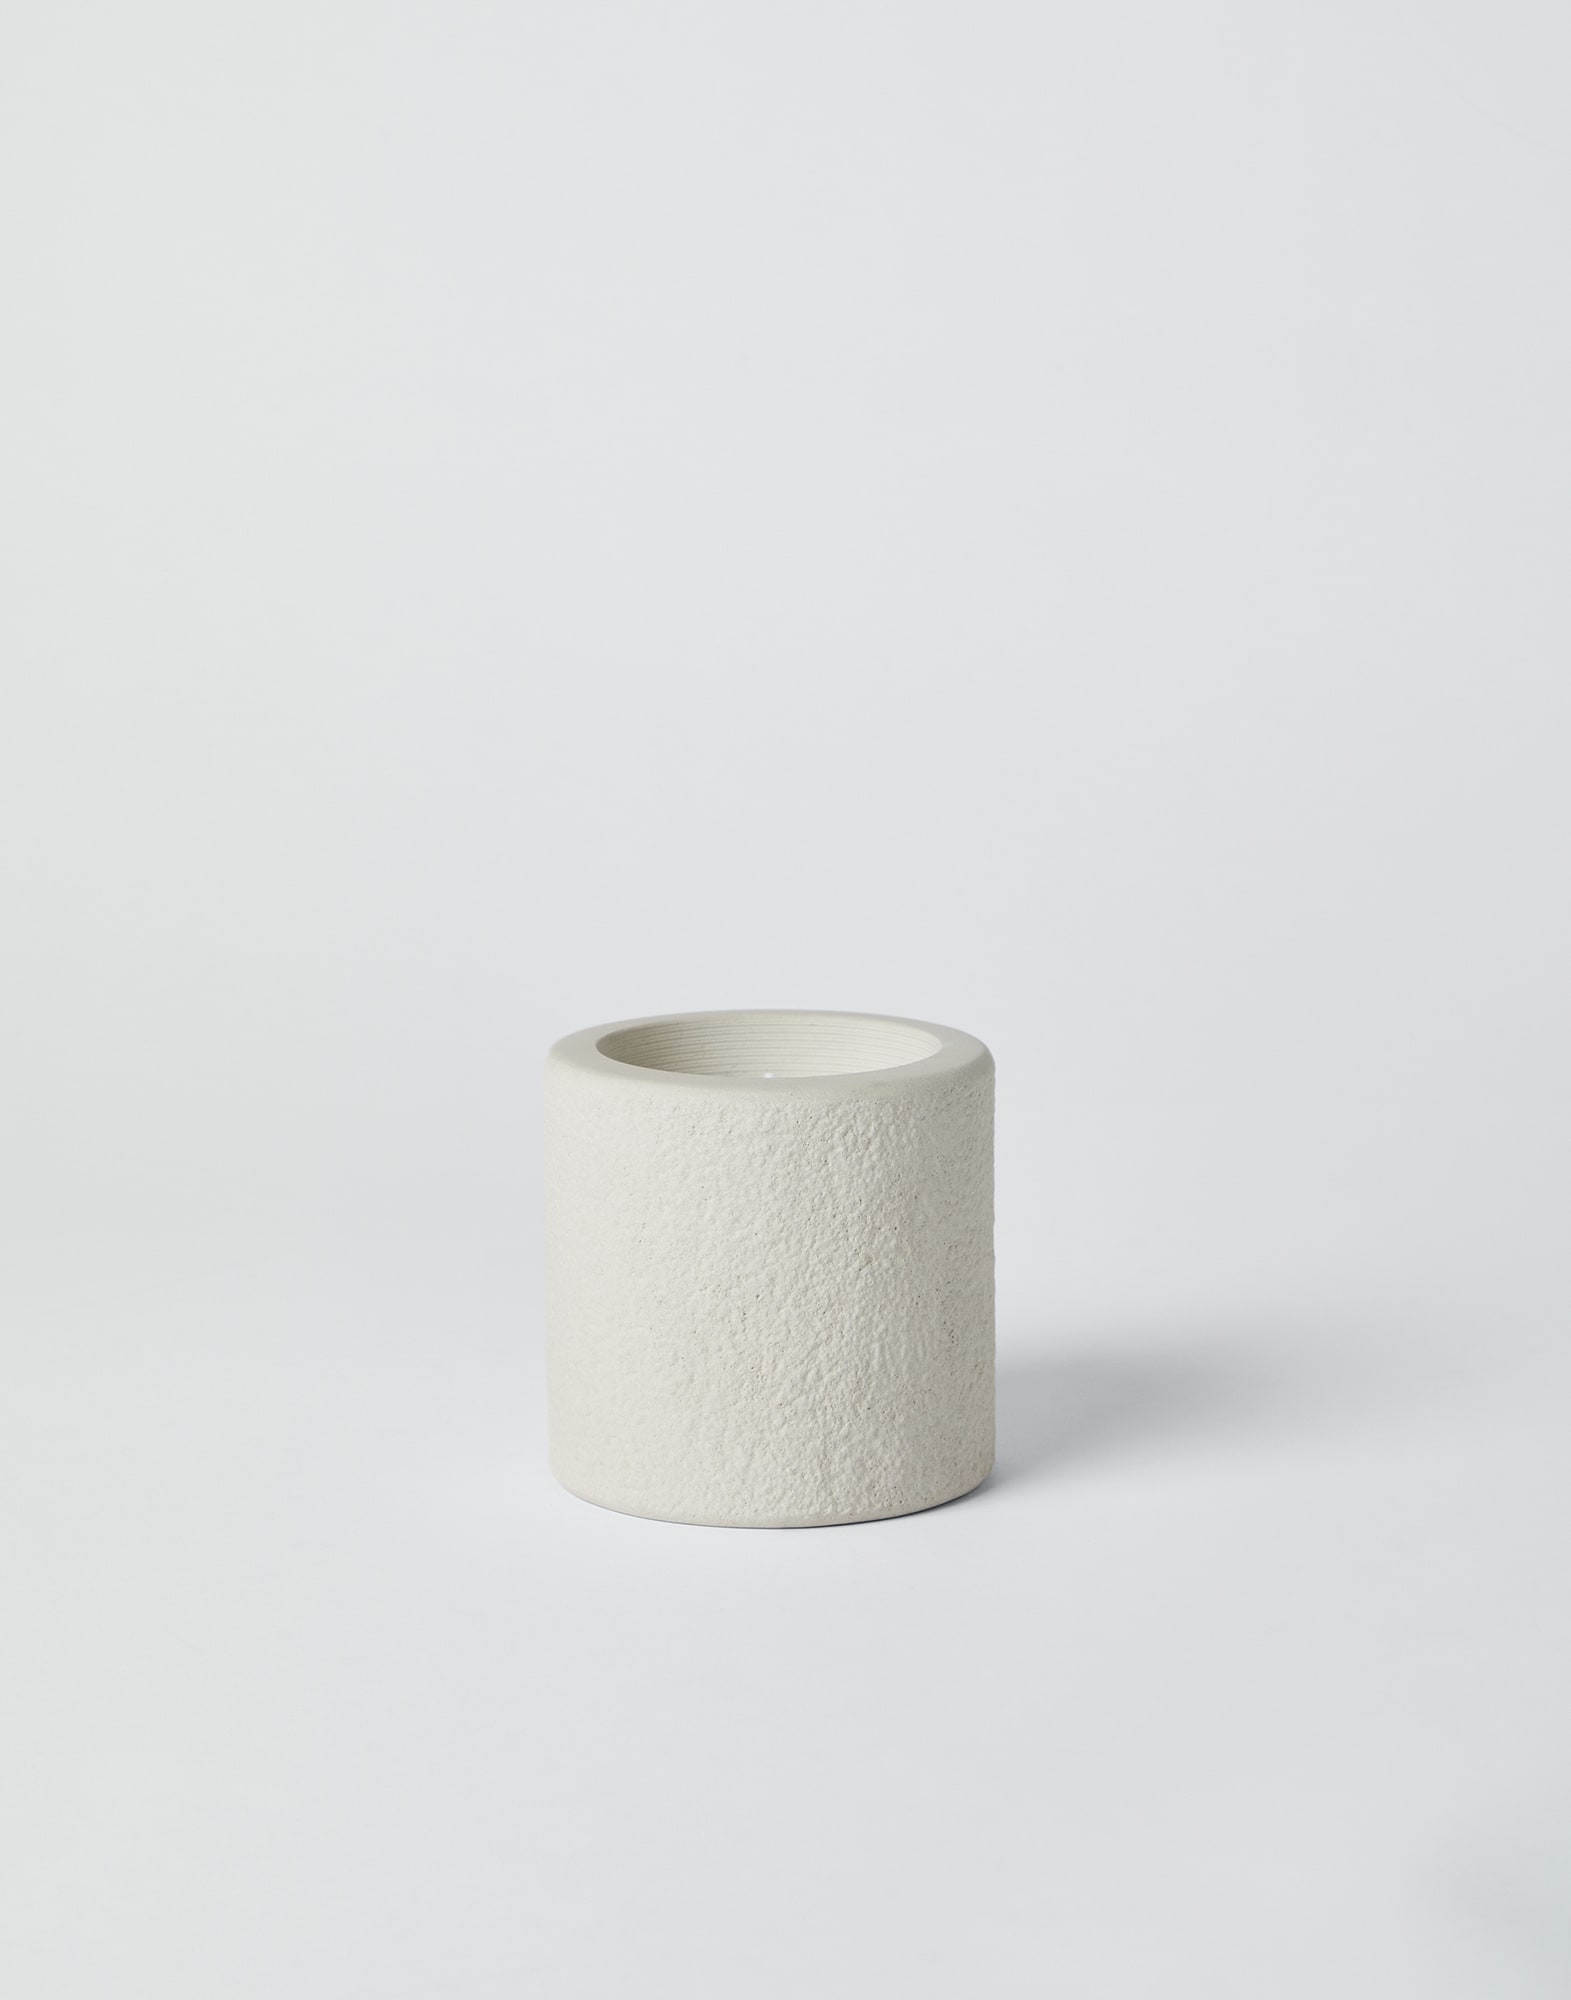 Candle in a stone vessel